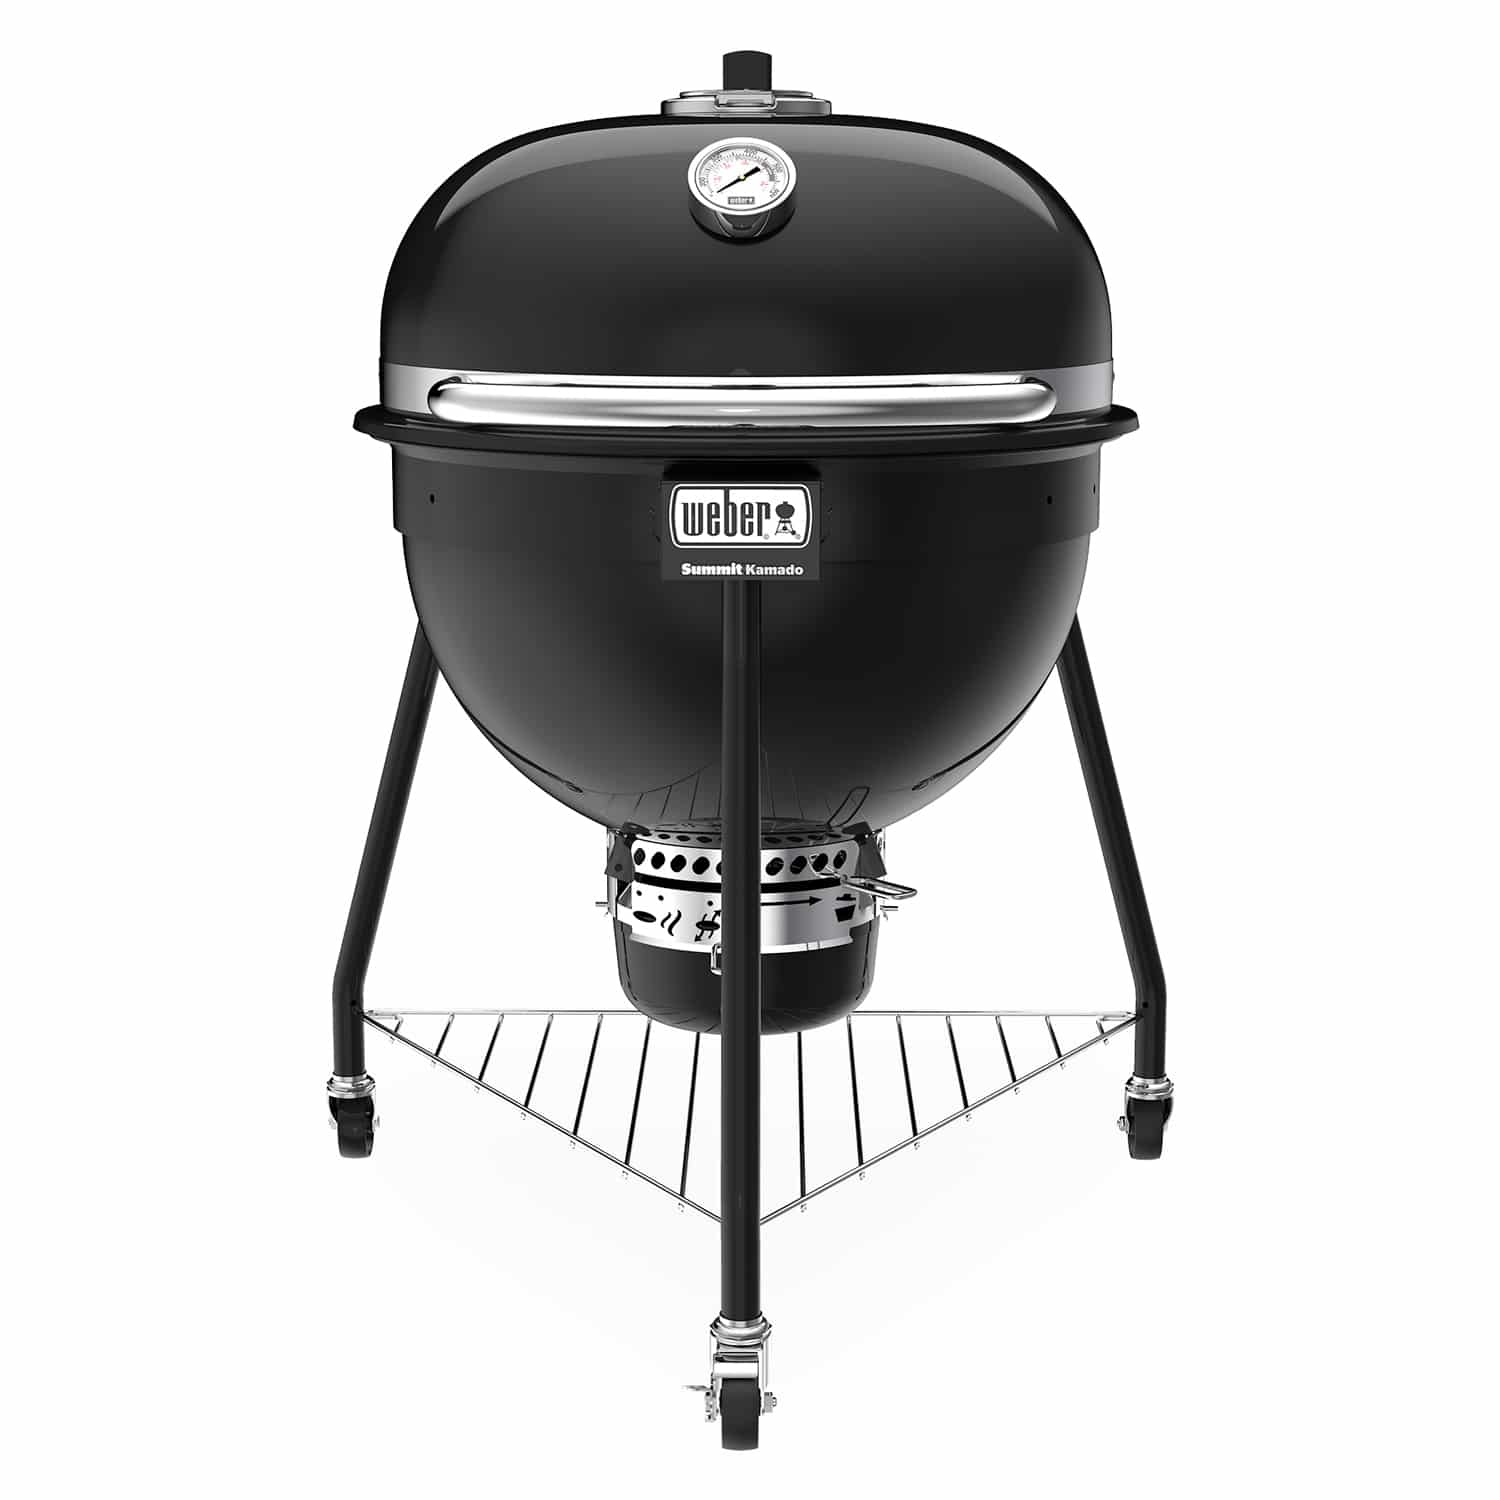 Summit Kamado E6 18201001 Charcoal Grill, 2-Grate, 452 sq-in Primary Cooking Surface, Black